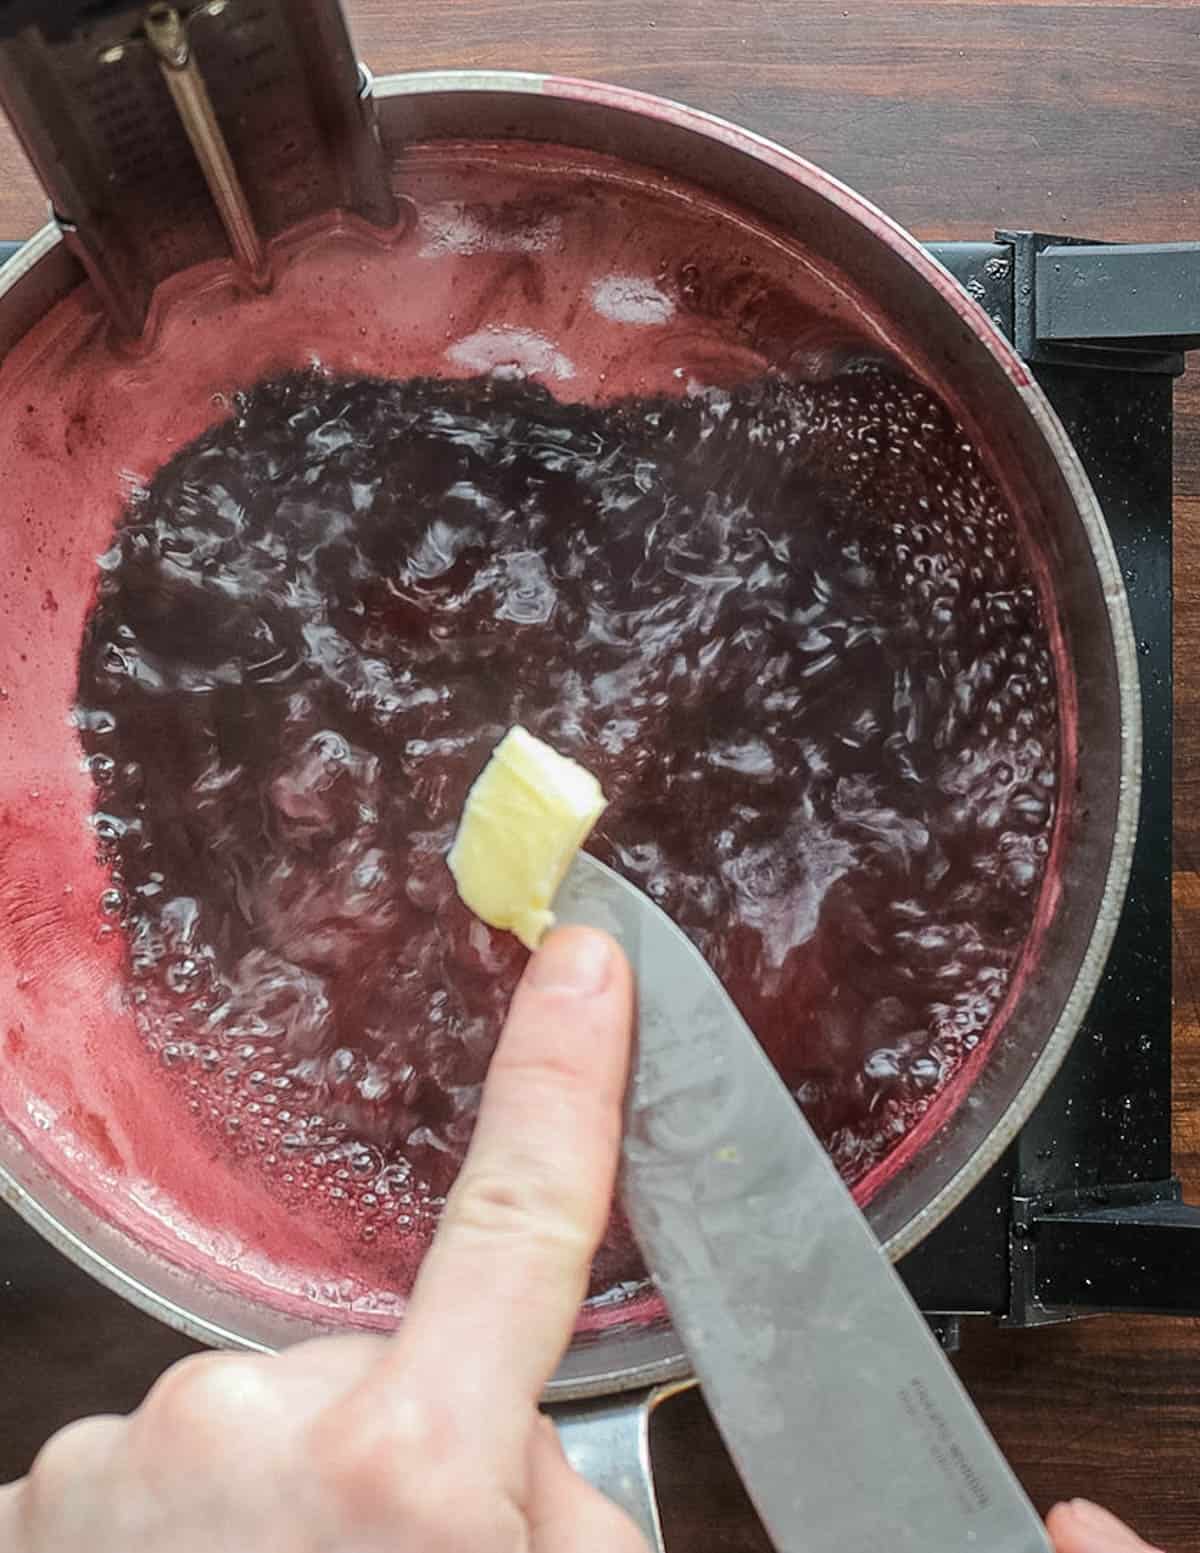 Adding a knob of butter to a pot of cooking jelly to prevent overflowing.